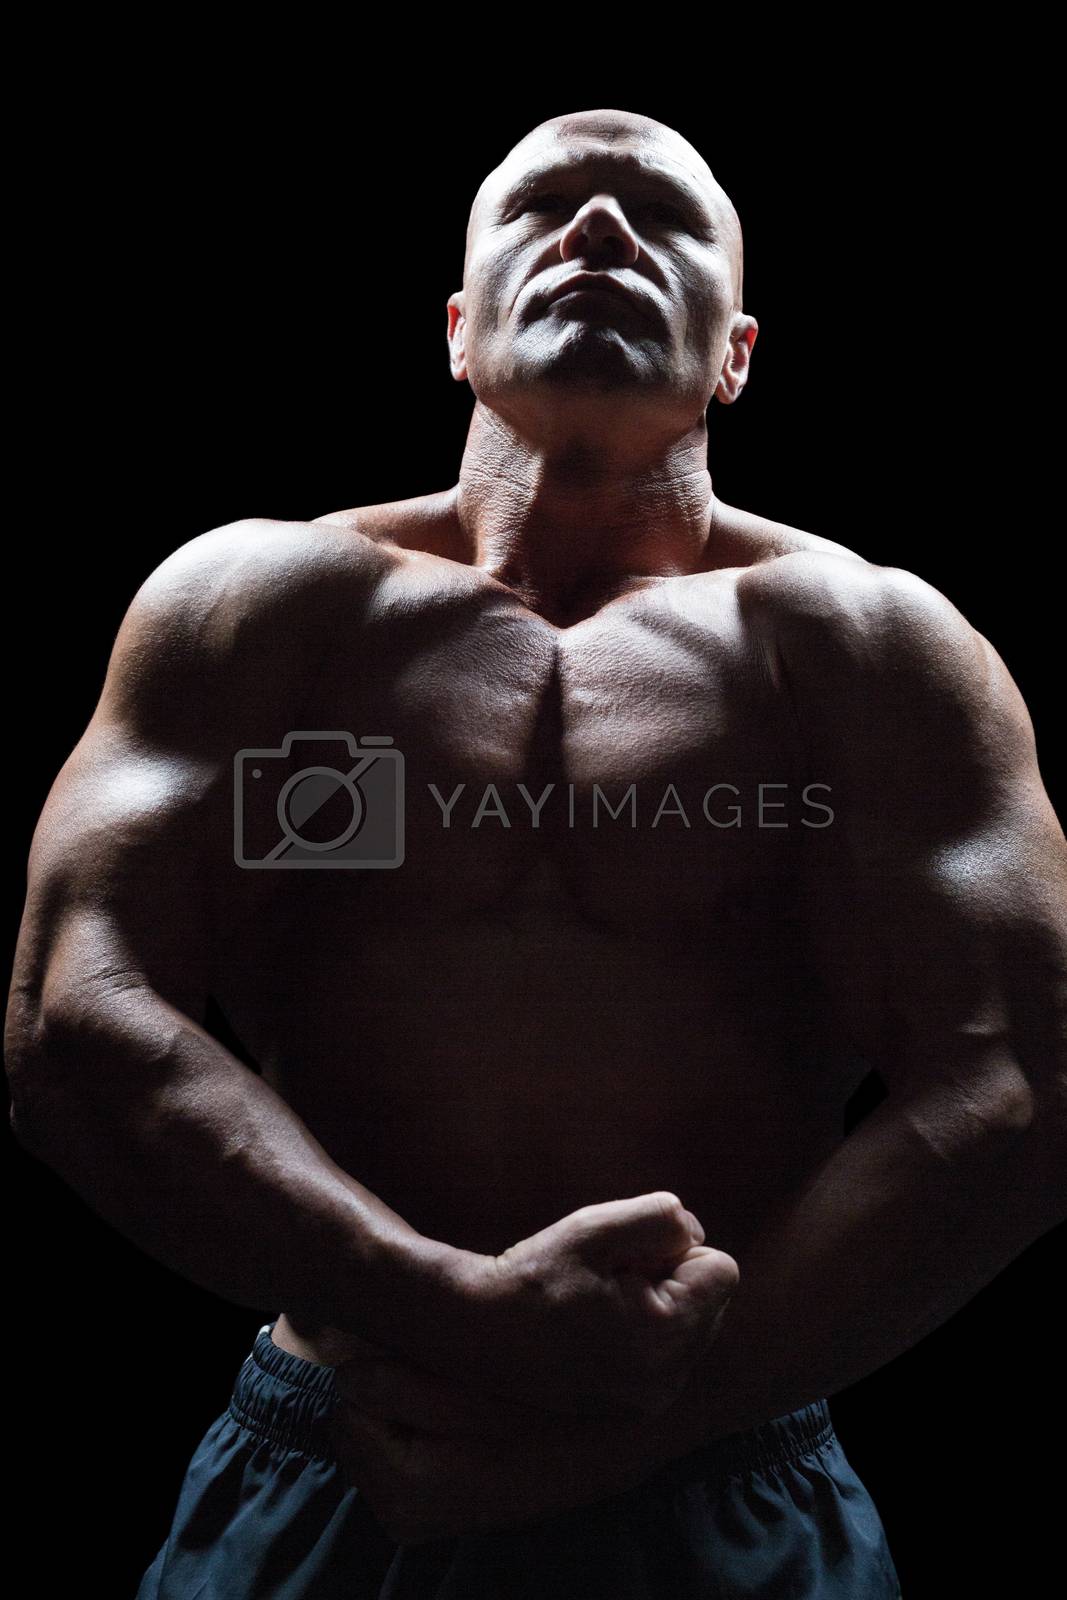 Royalty free image of Bodybuilder looking up while flexing muscles by Wavebreakmedia